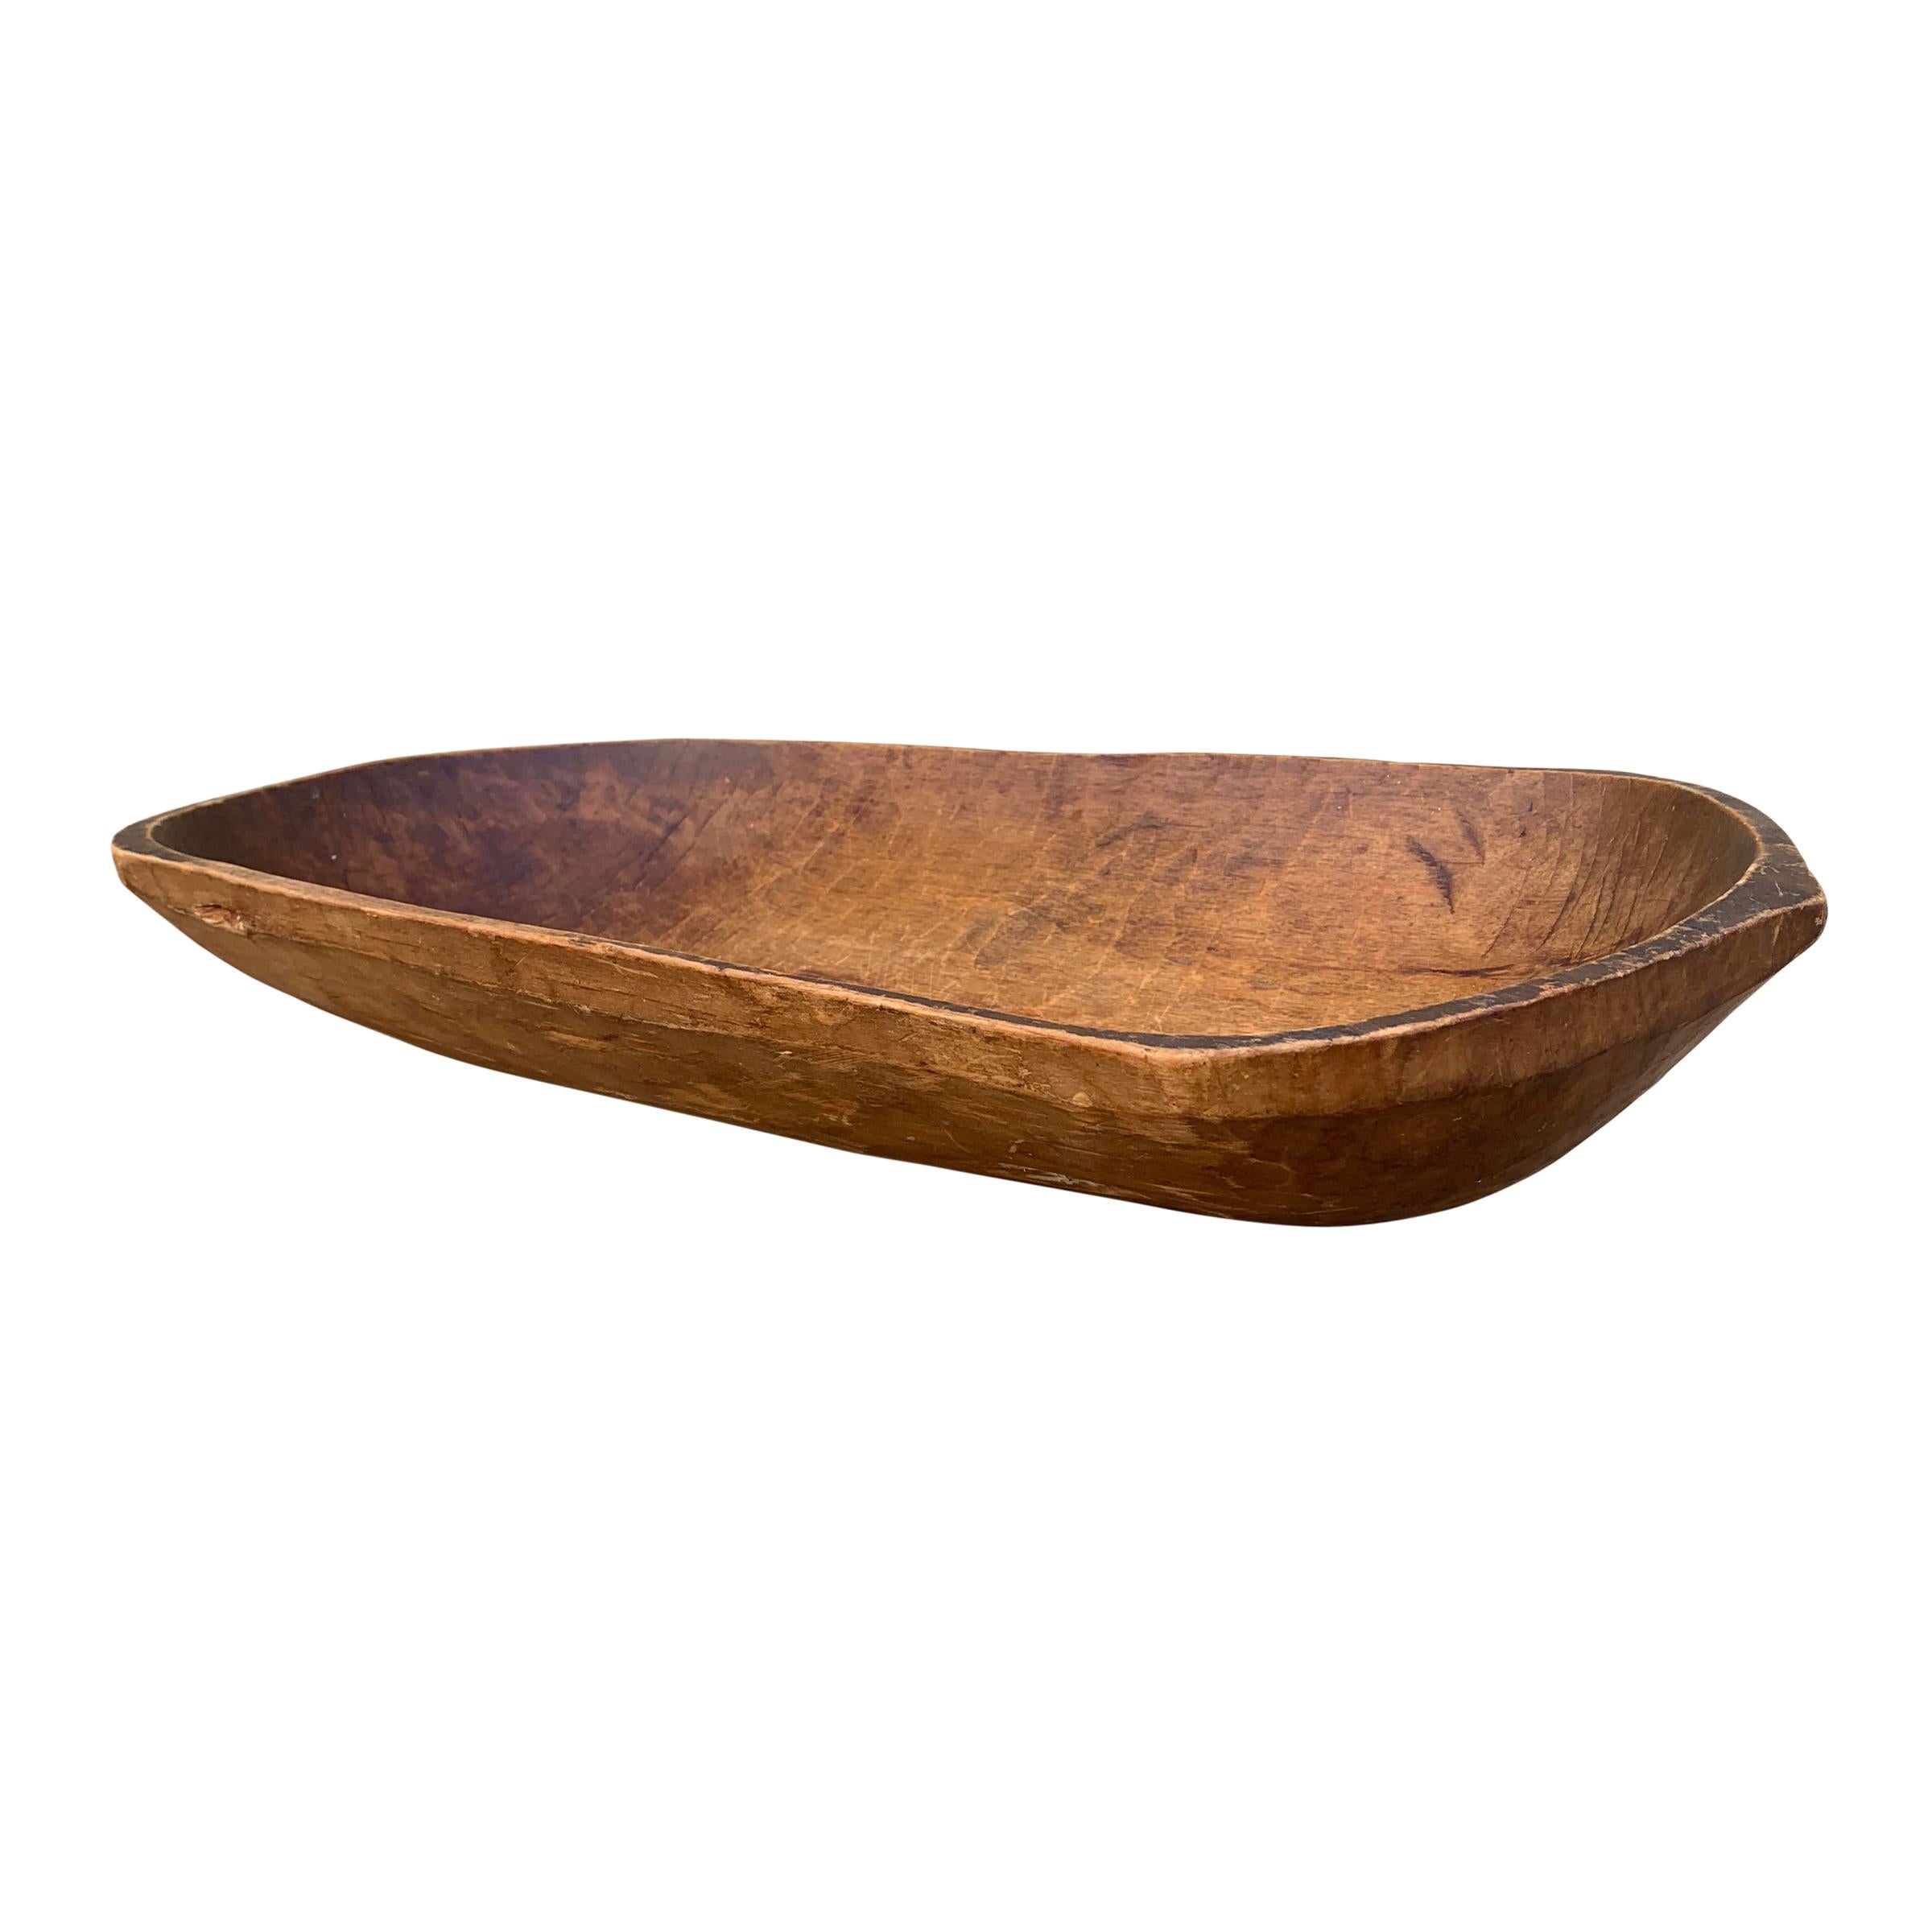 Country 19th Century American Dough Bowl